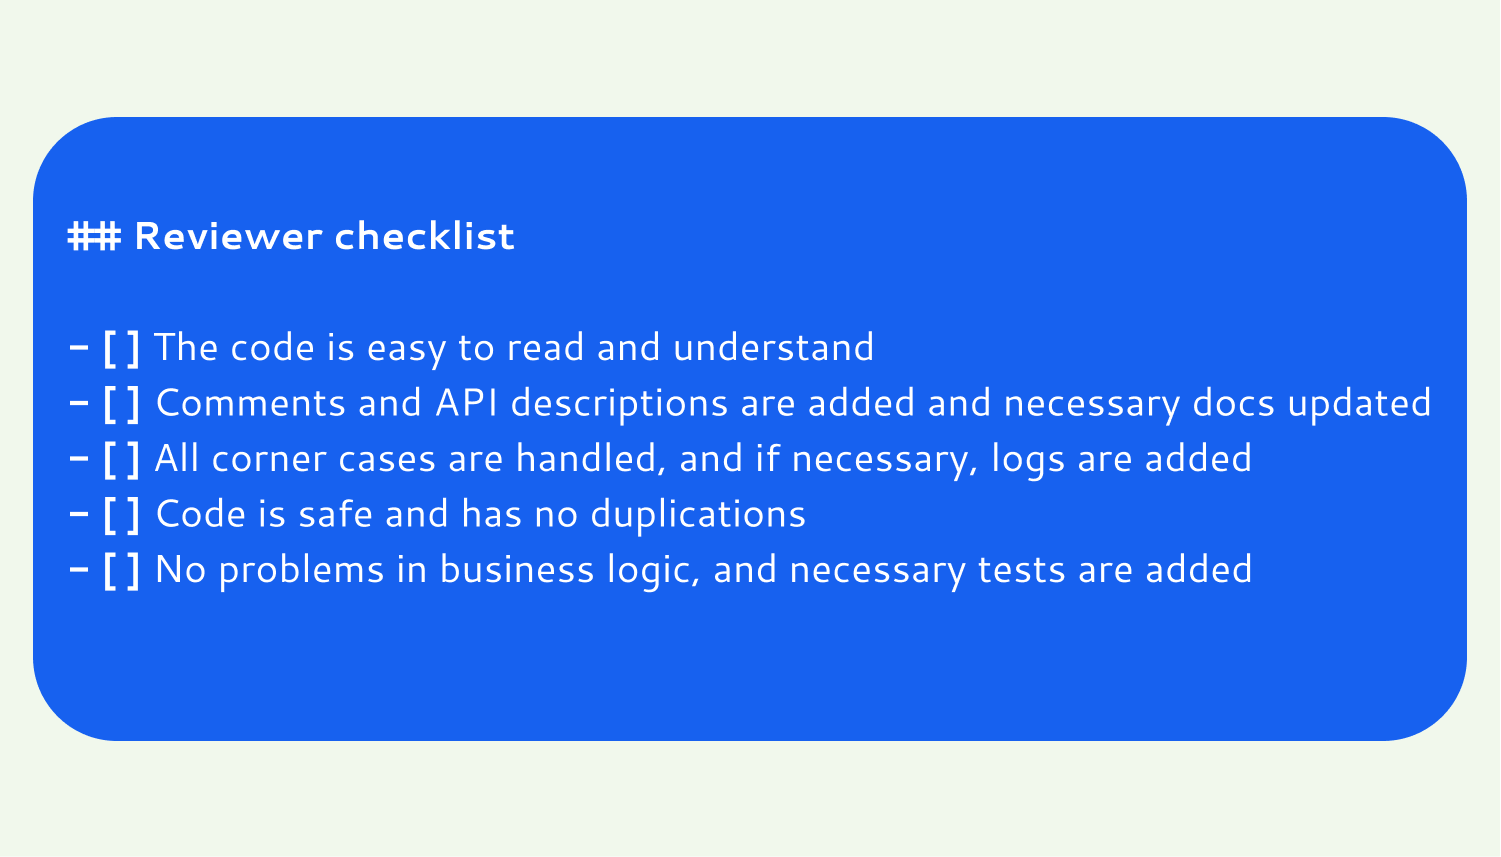 Reviewer’s checklist for an effective code review